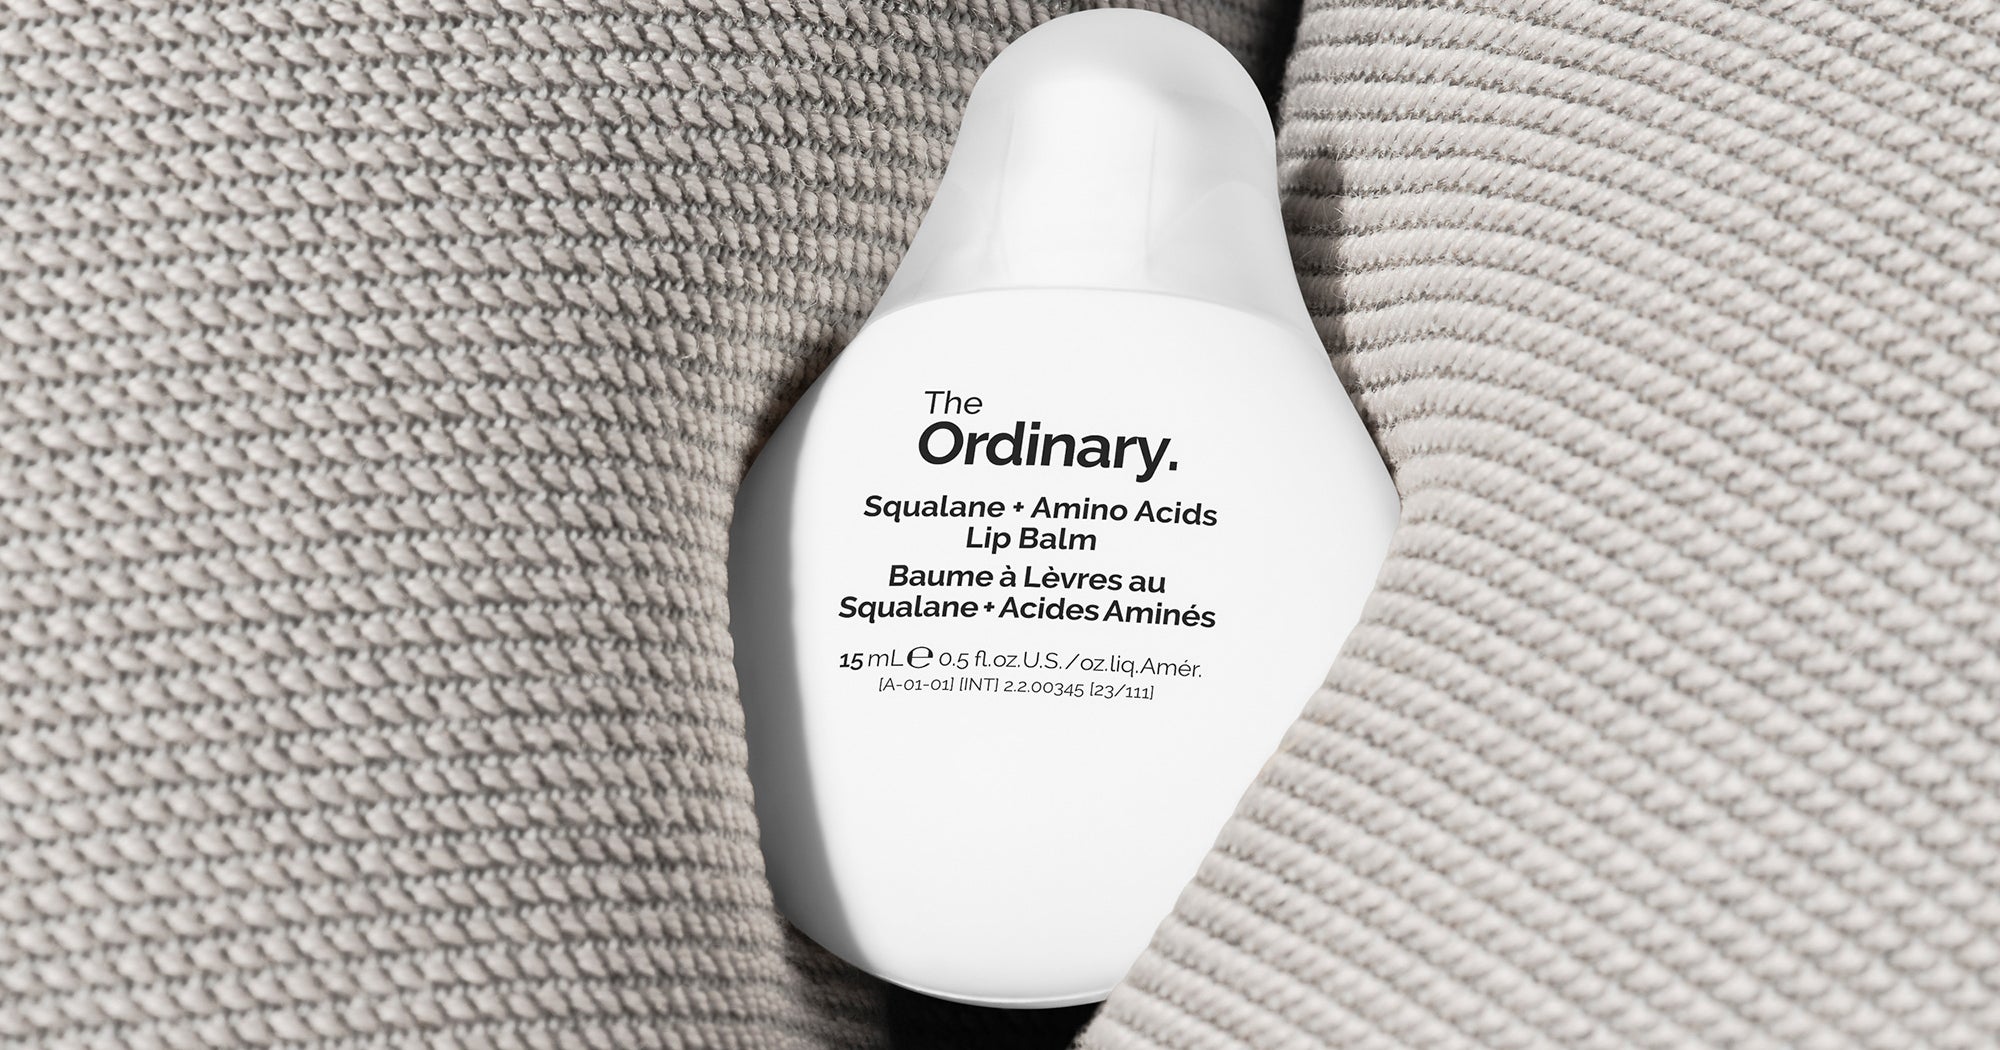 I Tried The Ordinary’s First Lip Balm & It’s Unique In So Many Ways